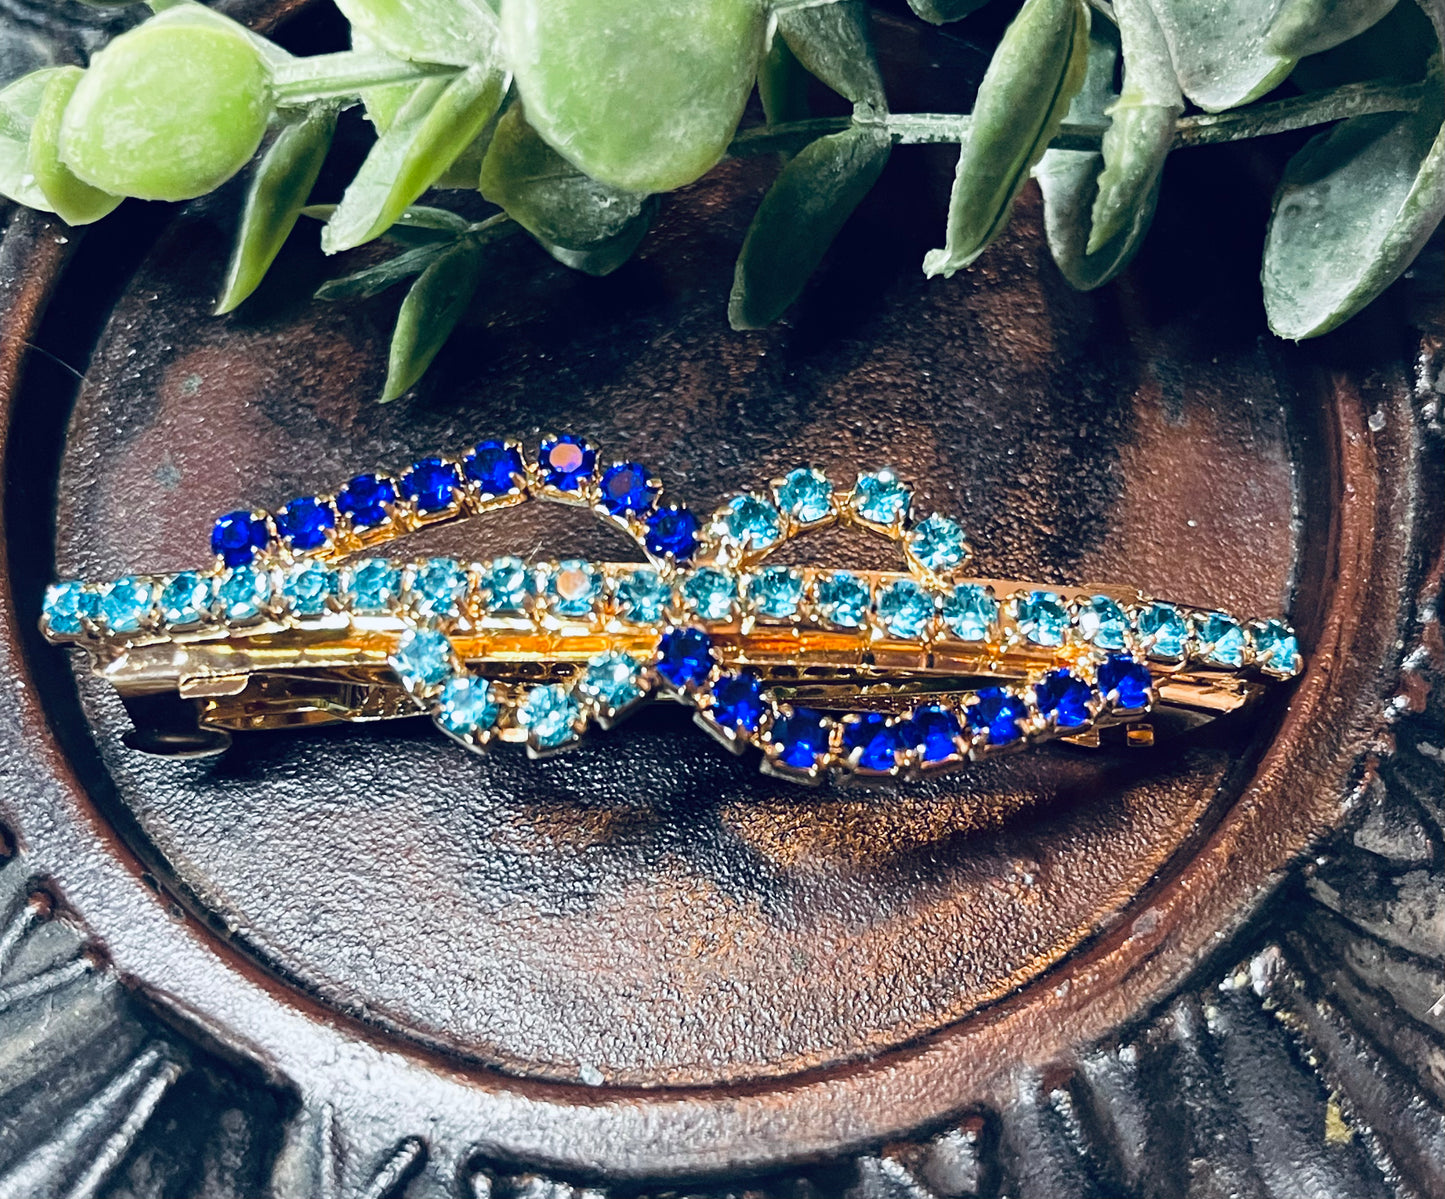 Blue Teal Crystal rhinestone barrette approximately 3.0” gold tone formal hair accessories gift wedding bridesmaid